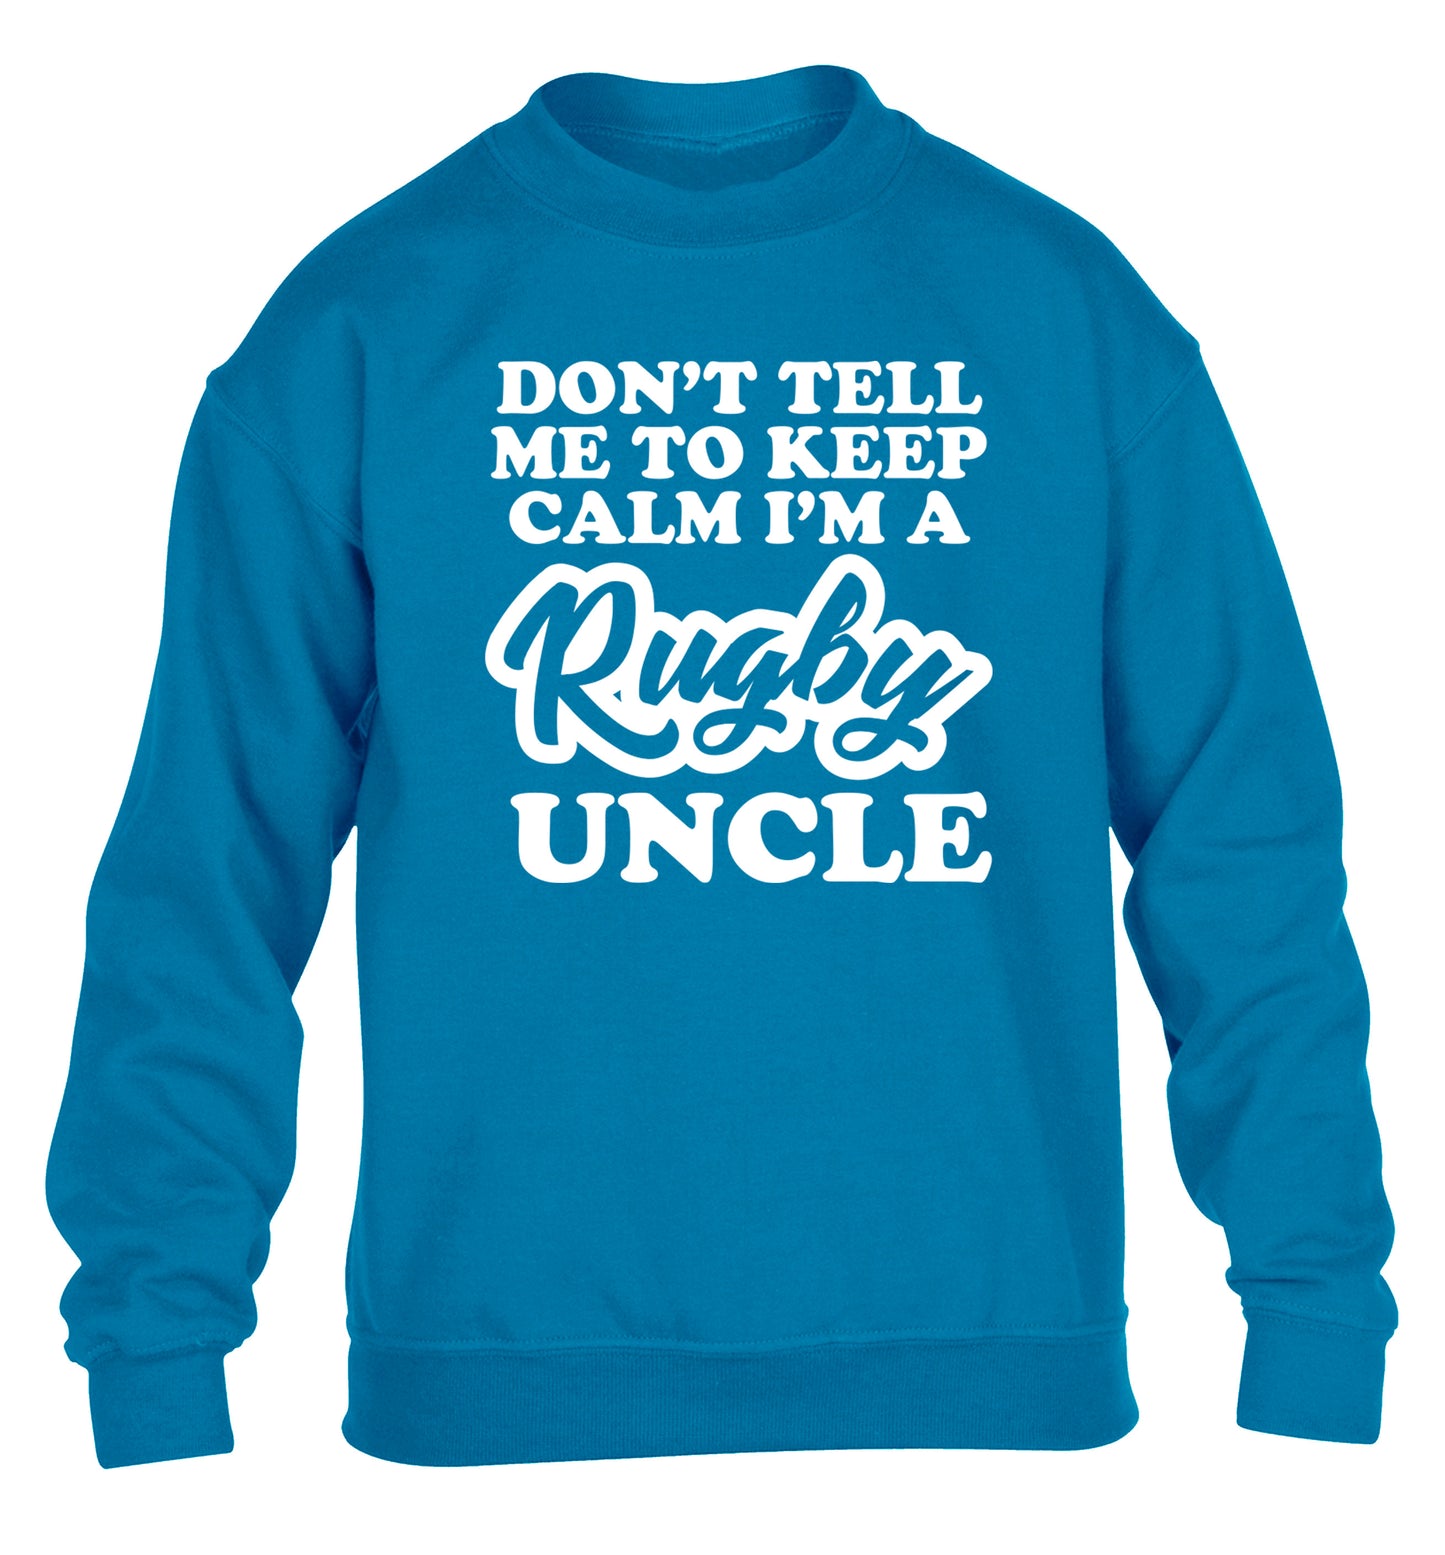 Don't tell me to keep calm I'm a rugby uncle children's blue sweater 12-13 Years